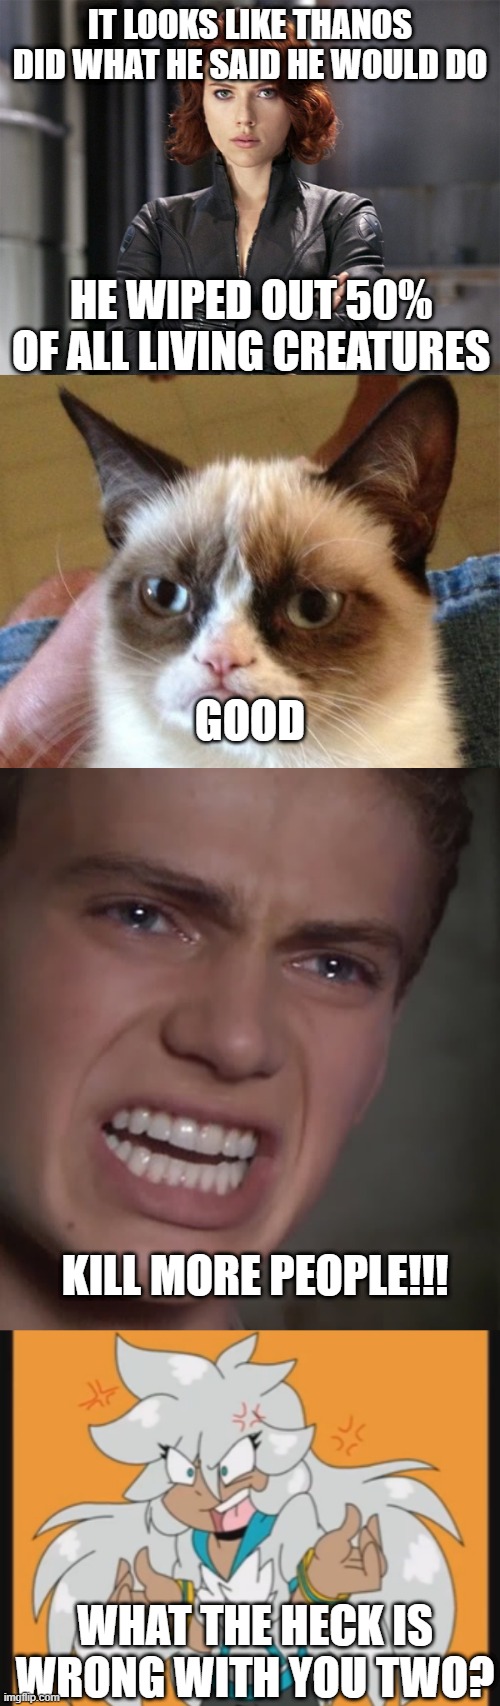 Avengers 4 Commentary | IT LOOKS LIKE THANOS DID WHAT HE SAID HE WOULD DO; HE WIPED OUT 50% OF ALL LIVING CREATURES; GOOD; KILL MORE PEOPLE!!! WHAT THE HECK IS WRONG WITH YOU TWO? | image tagged in memes,grumpy cat,anakin skywalker,black widow - not impressed,what is wrong with you,avengers endgame | made w/ Imgflip meme maker